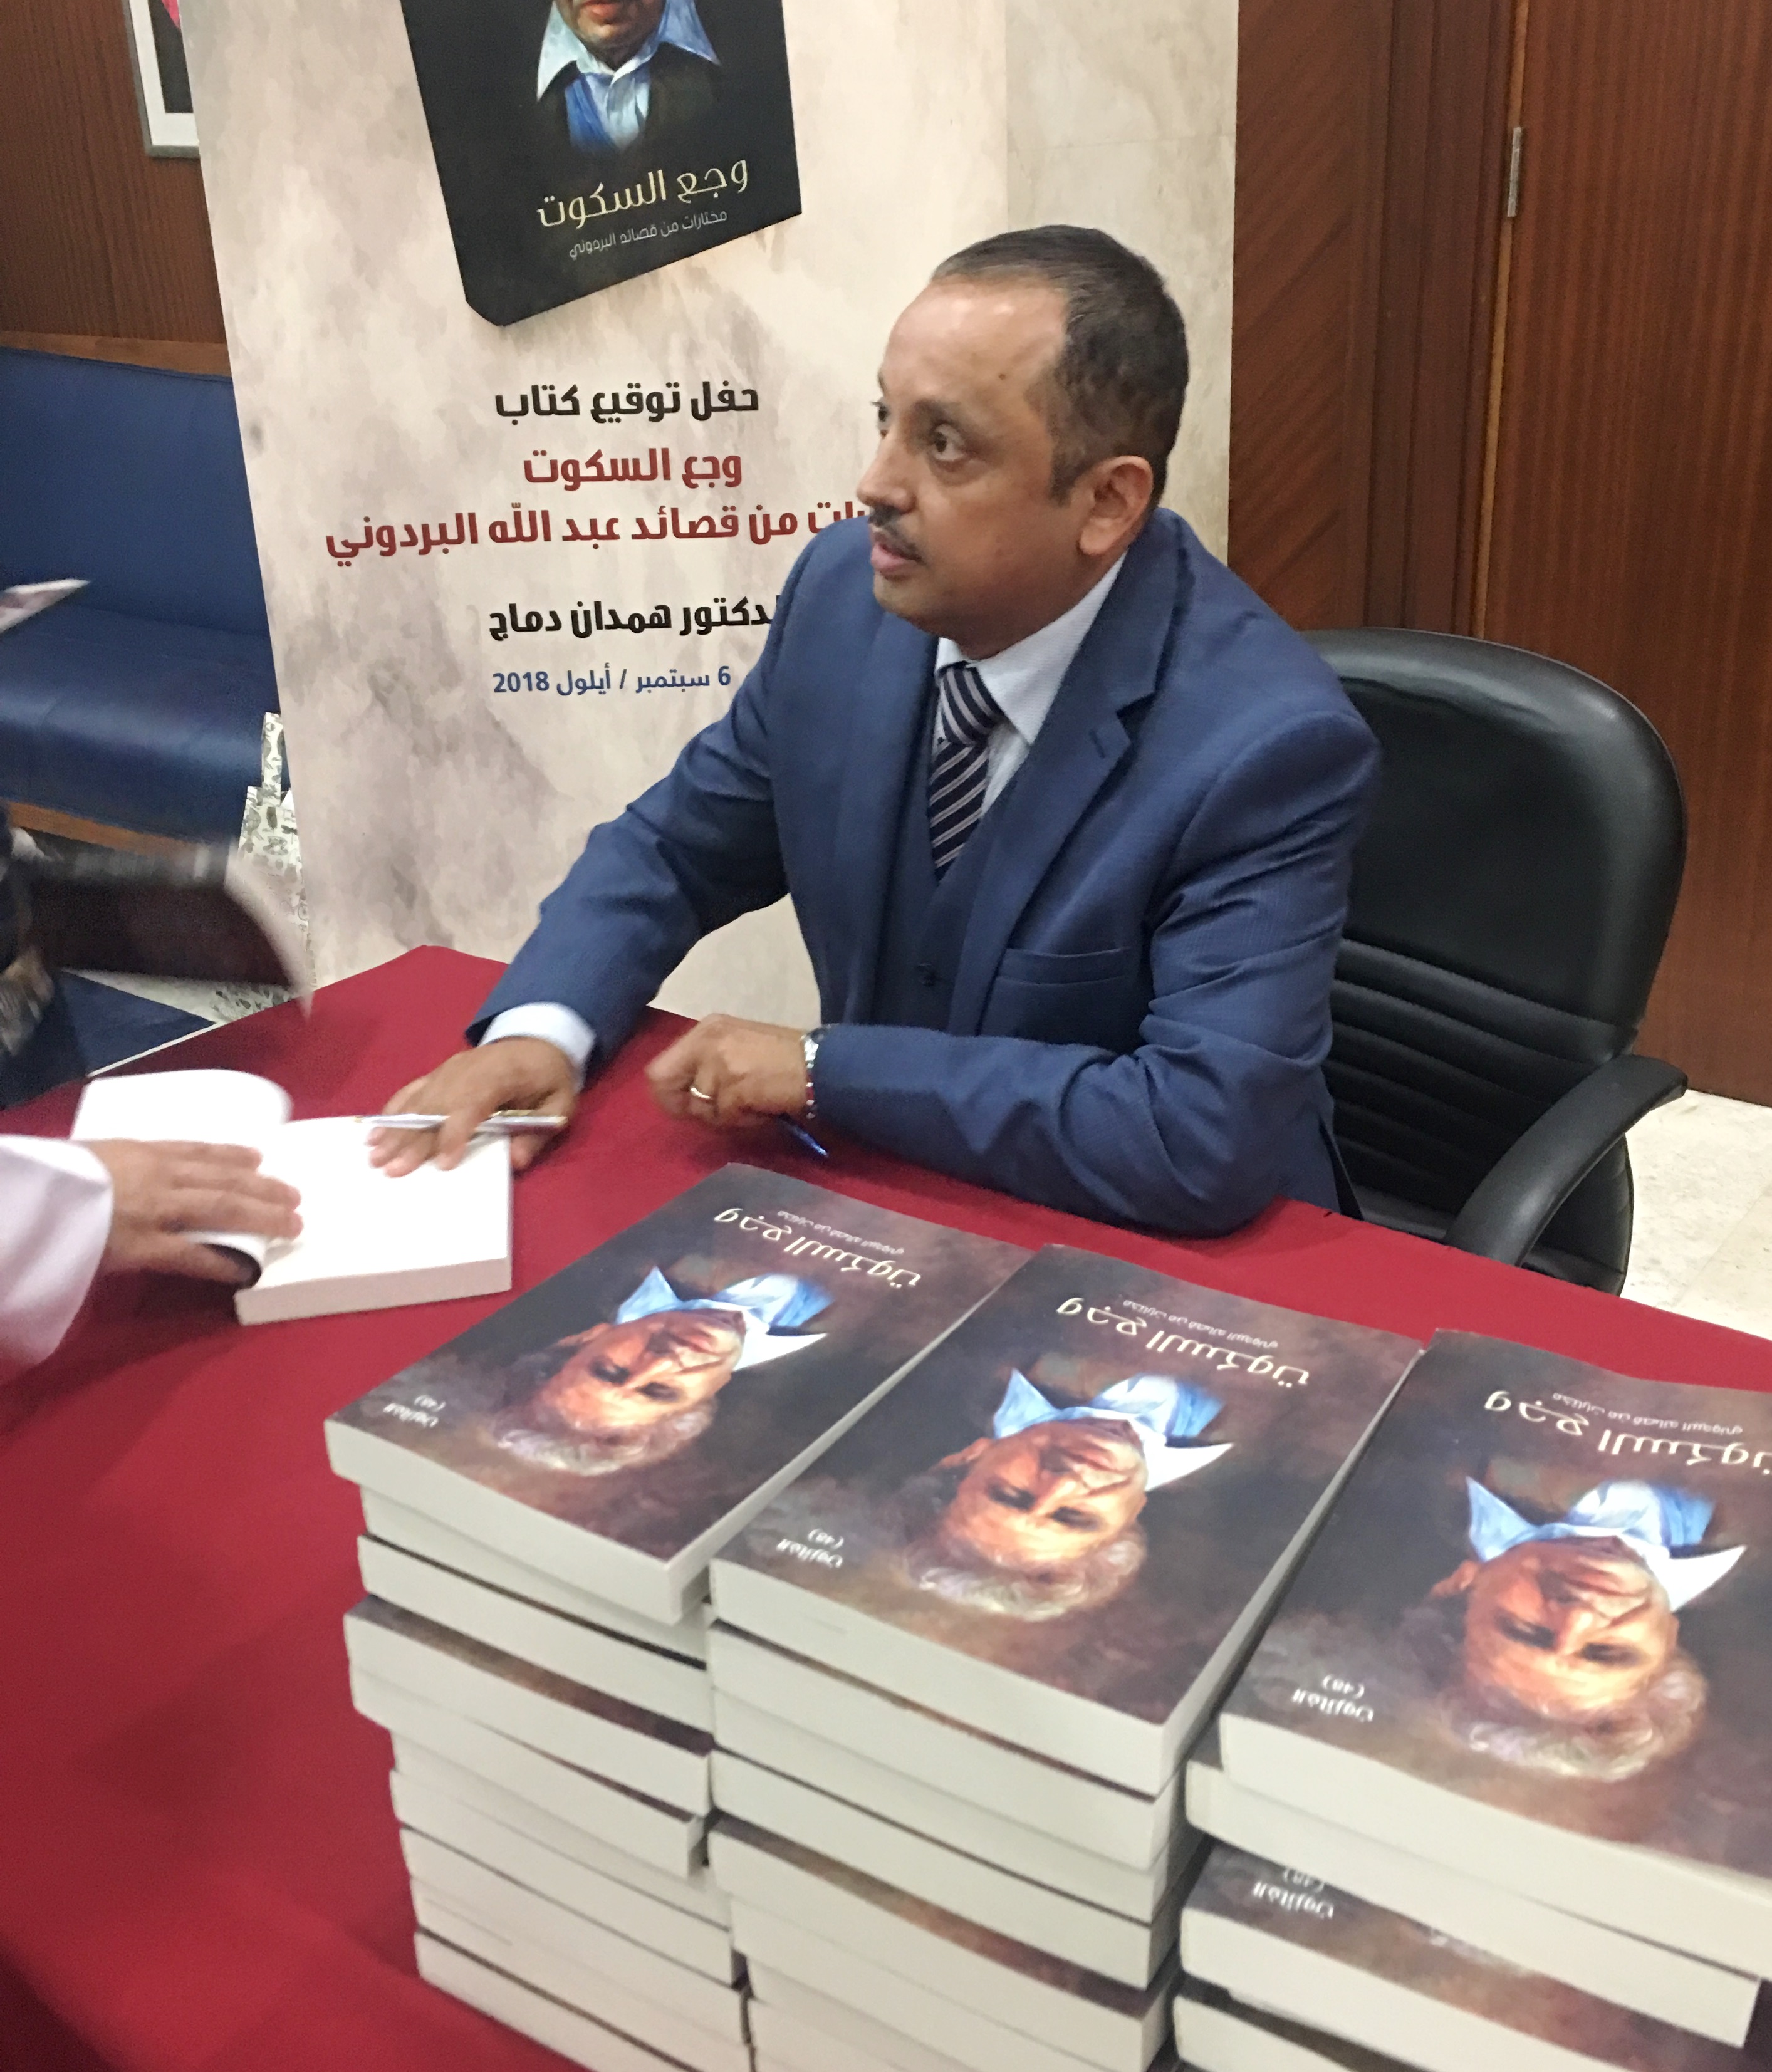 book Signing Al-Baradouni: The Agony of Silence